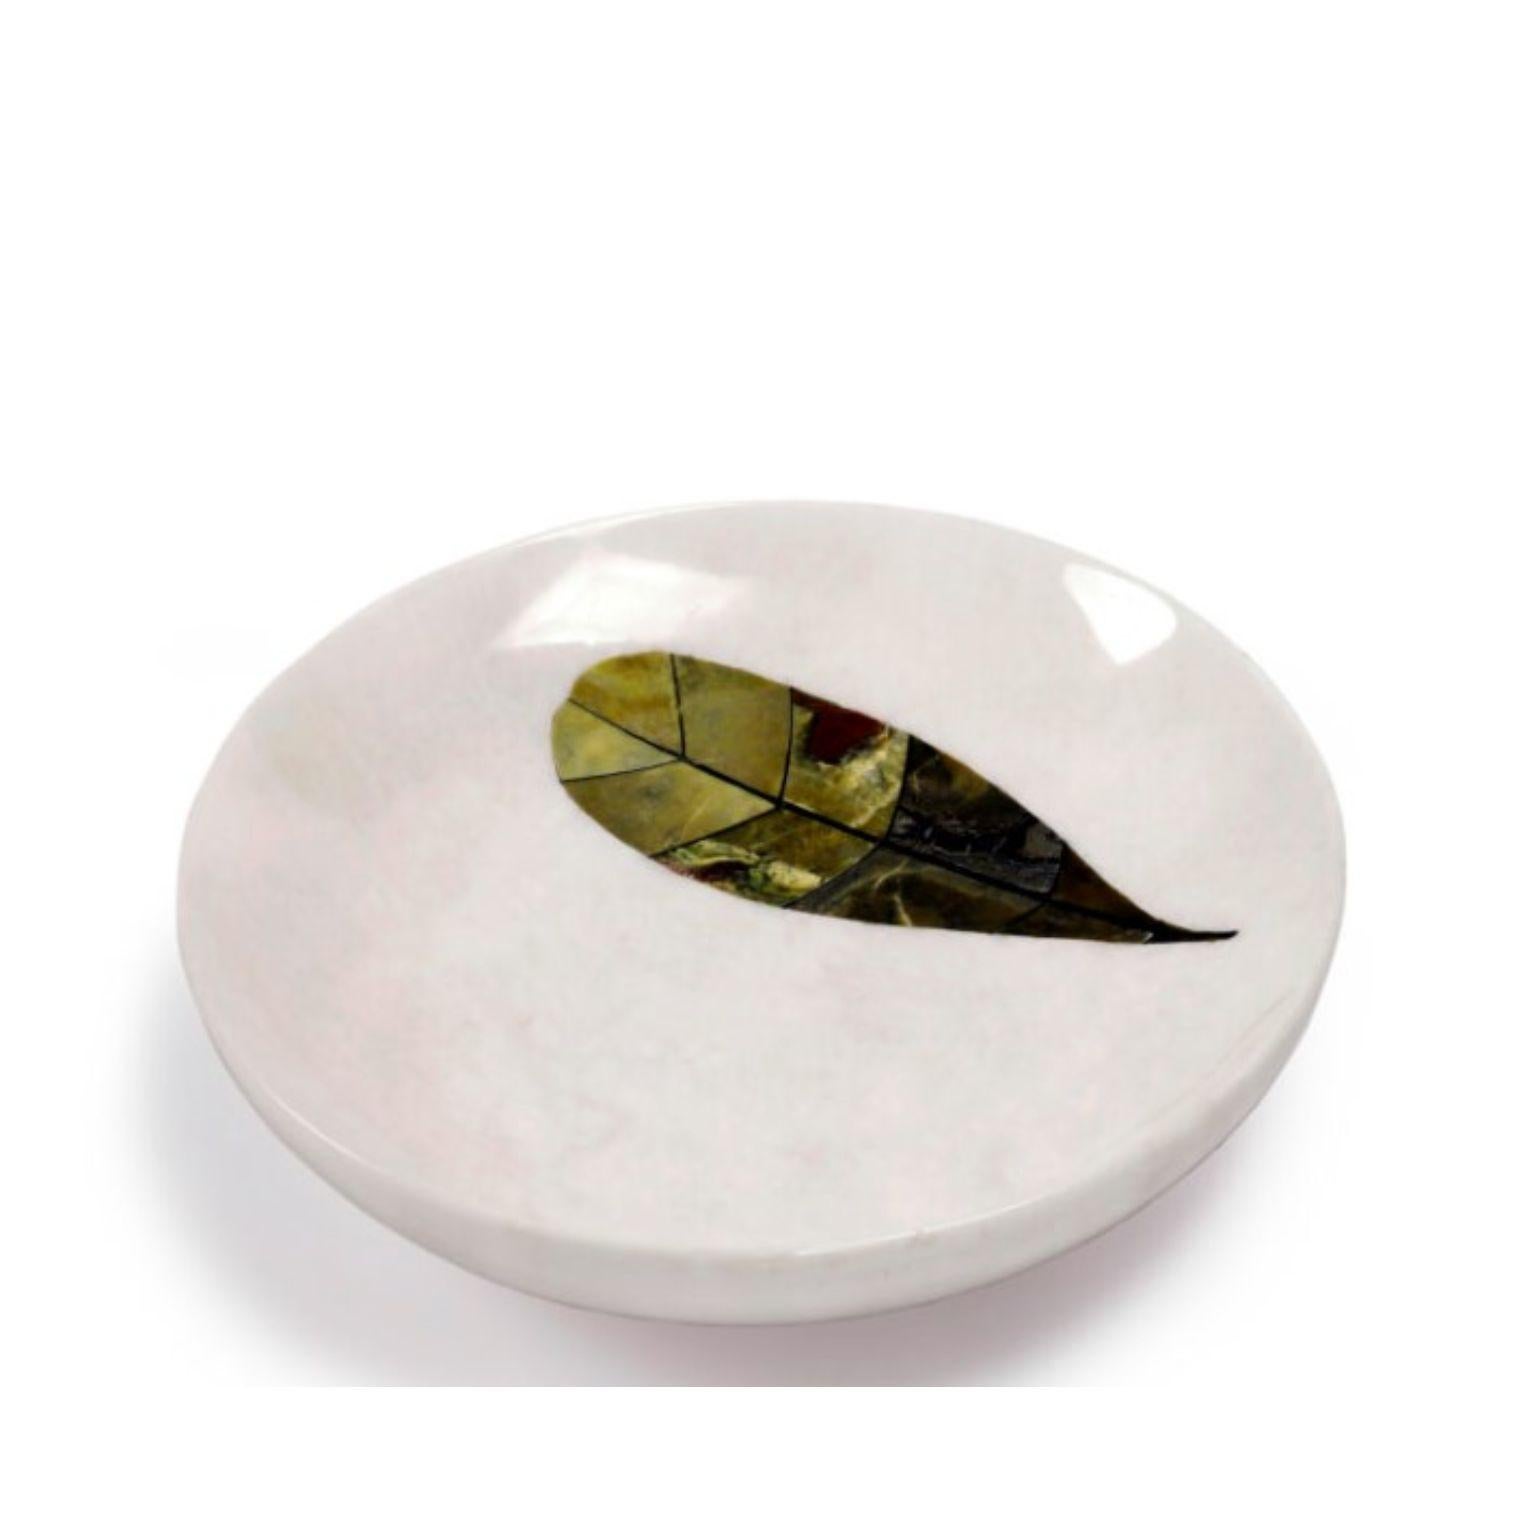 Champa center piece by Studio Lel
Dimensions: D41 x W41 x H7.6 cm
Materials: Serpentine, Marble

These are handmade from semiprecious stone and marble in a small artisanal workshop. Please note that variations and slight imperfections are part